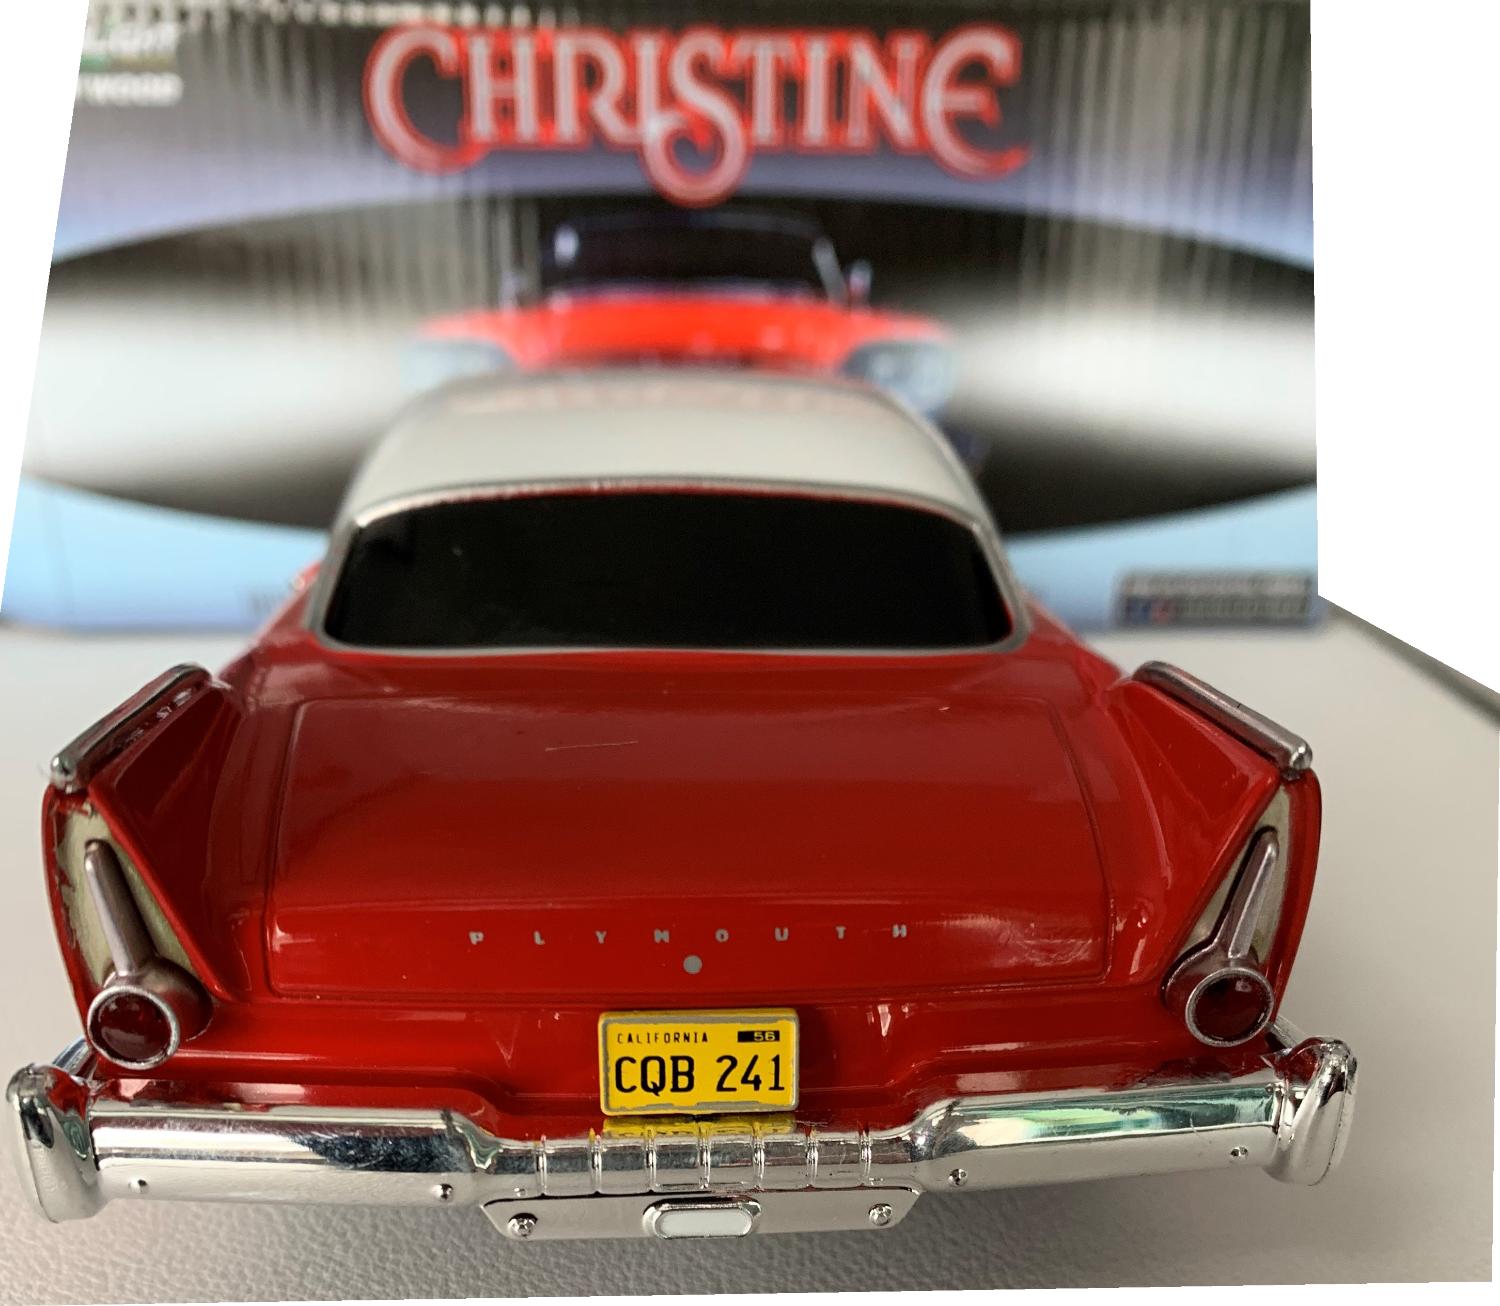 Christine 1958 Plymouth Fury (Evil Version) in red, 1:24 scale model, Greenlight